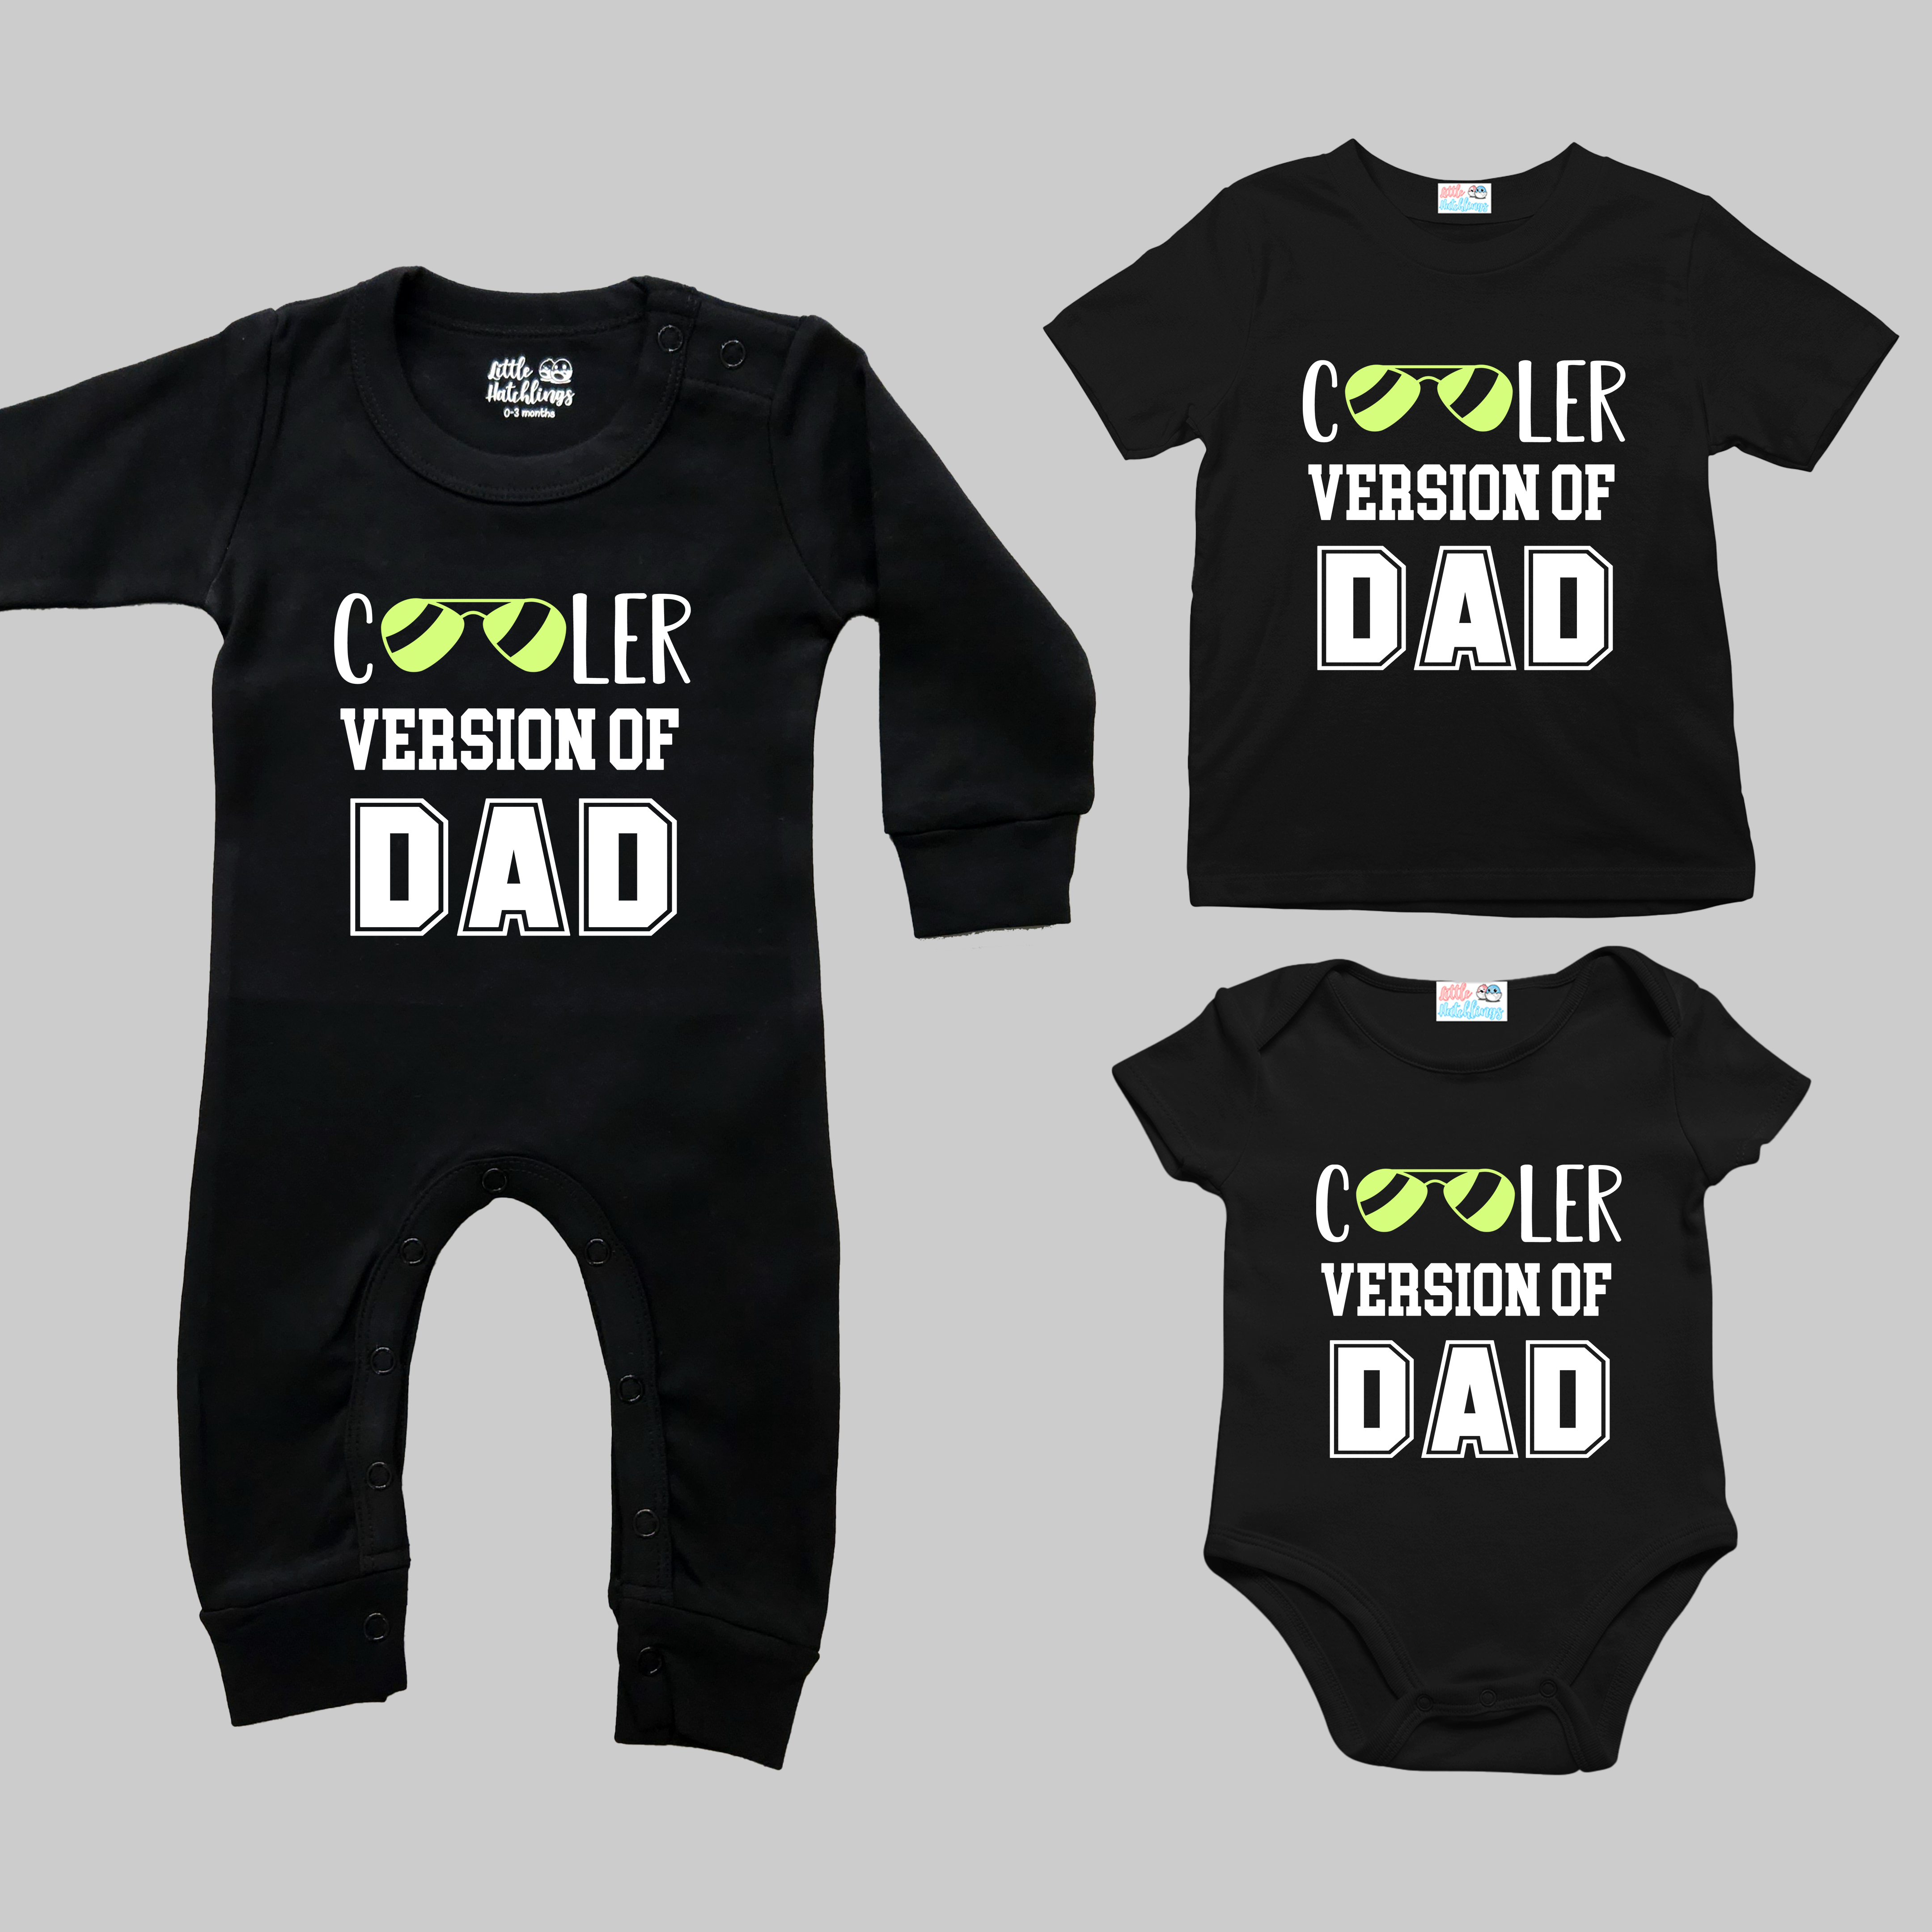 The Cool Dad + Cooler Version Of Dad Black Combo - Adult Tshirt + Full Romper